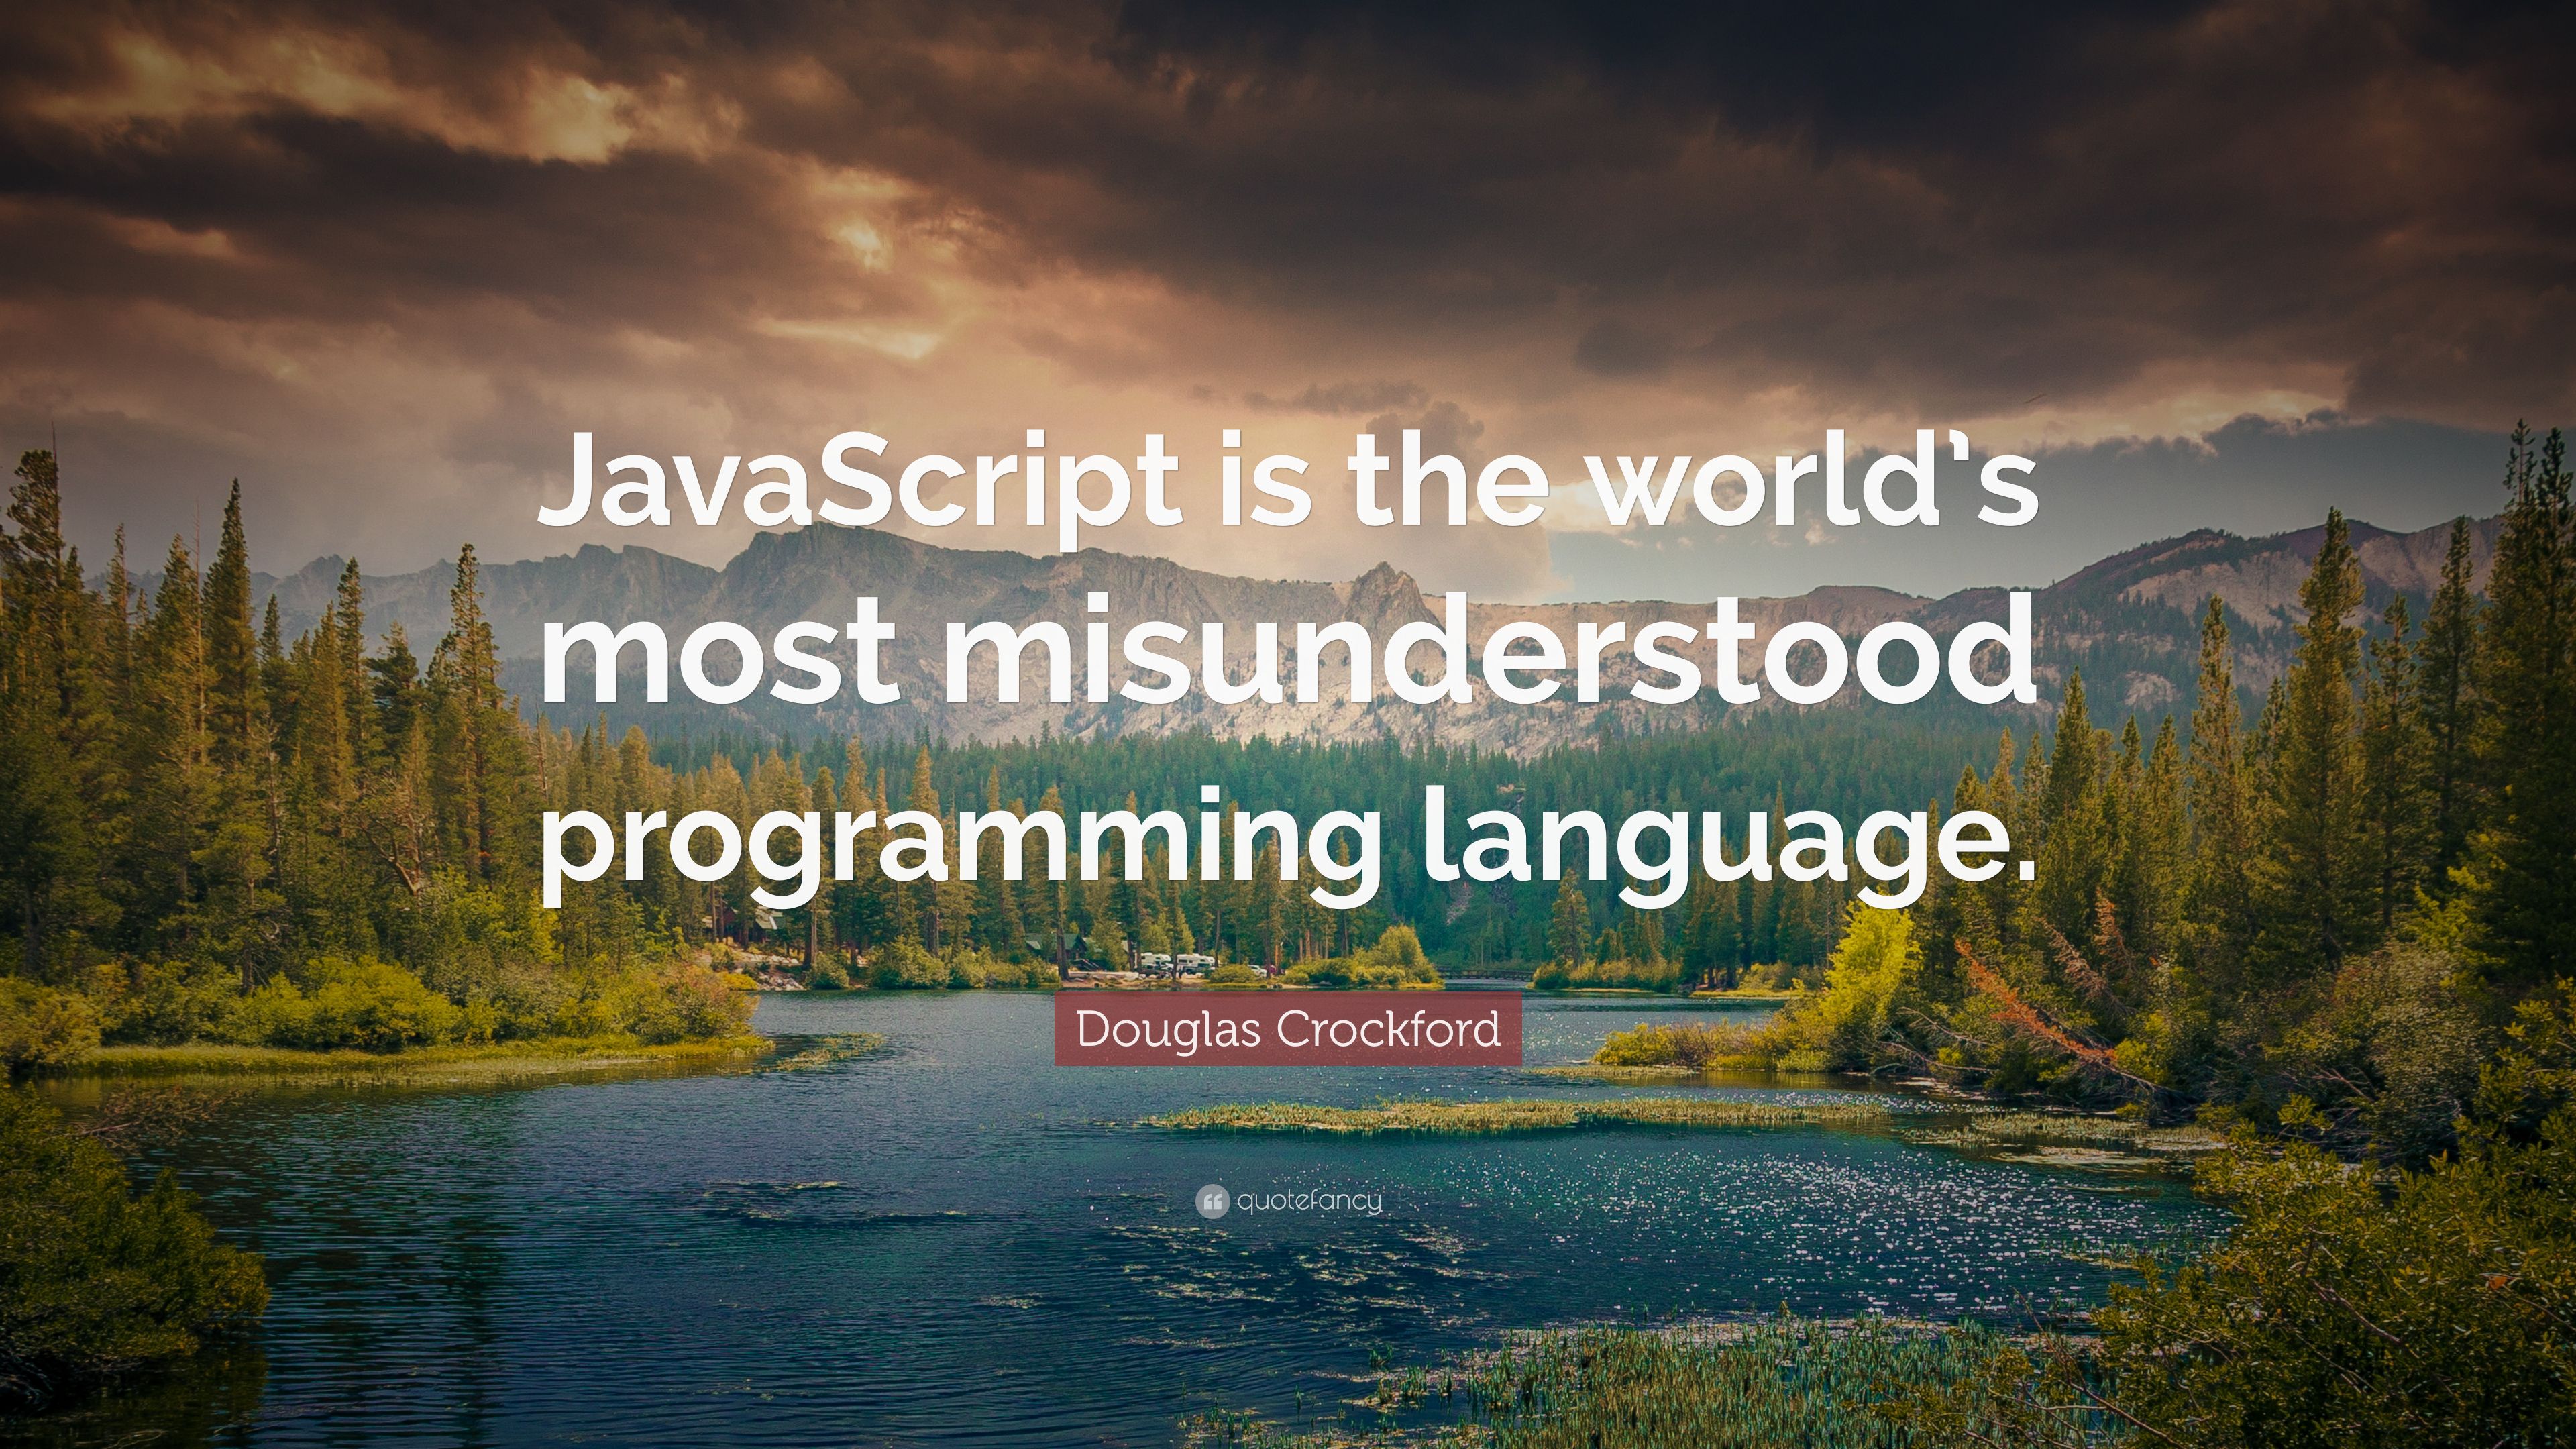 Douglas Crockford Quote: “JavaScript is the world's most